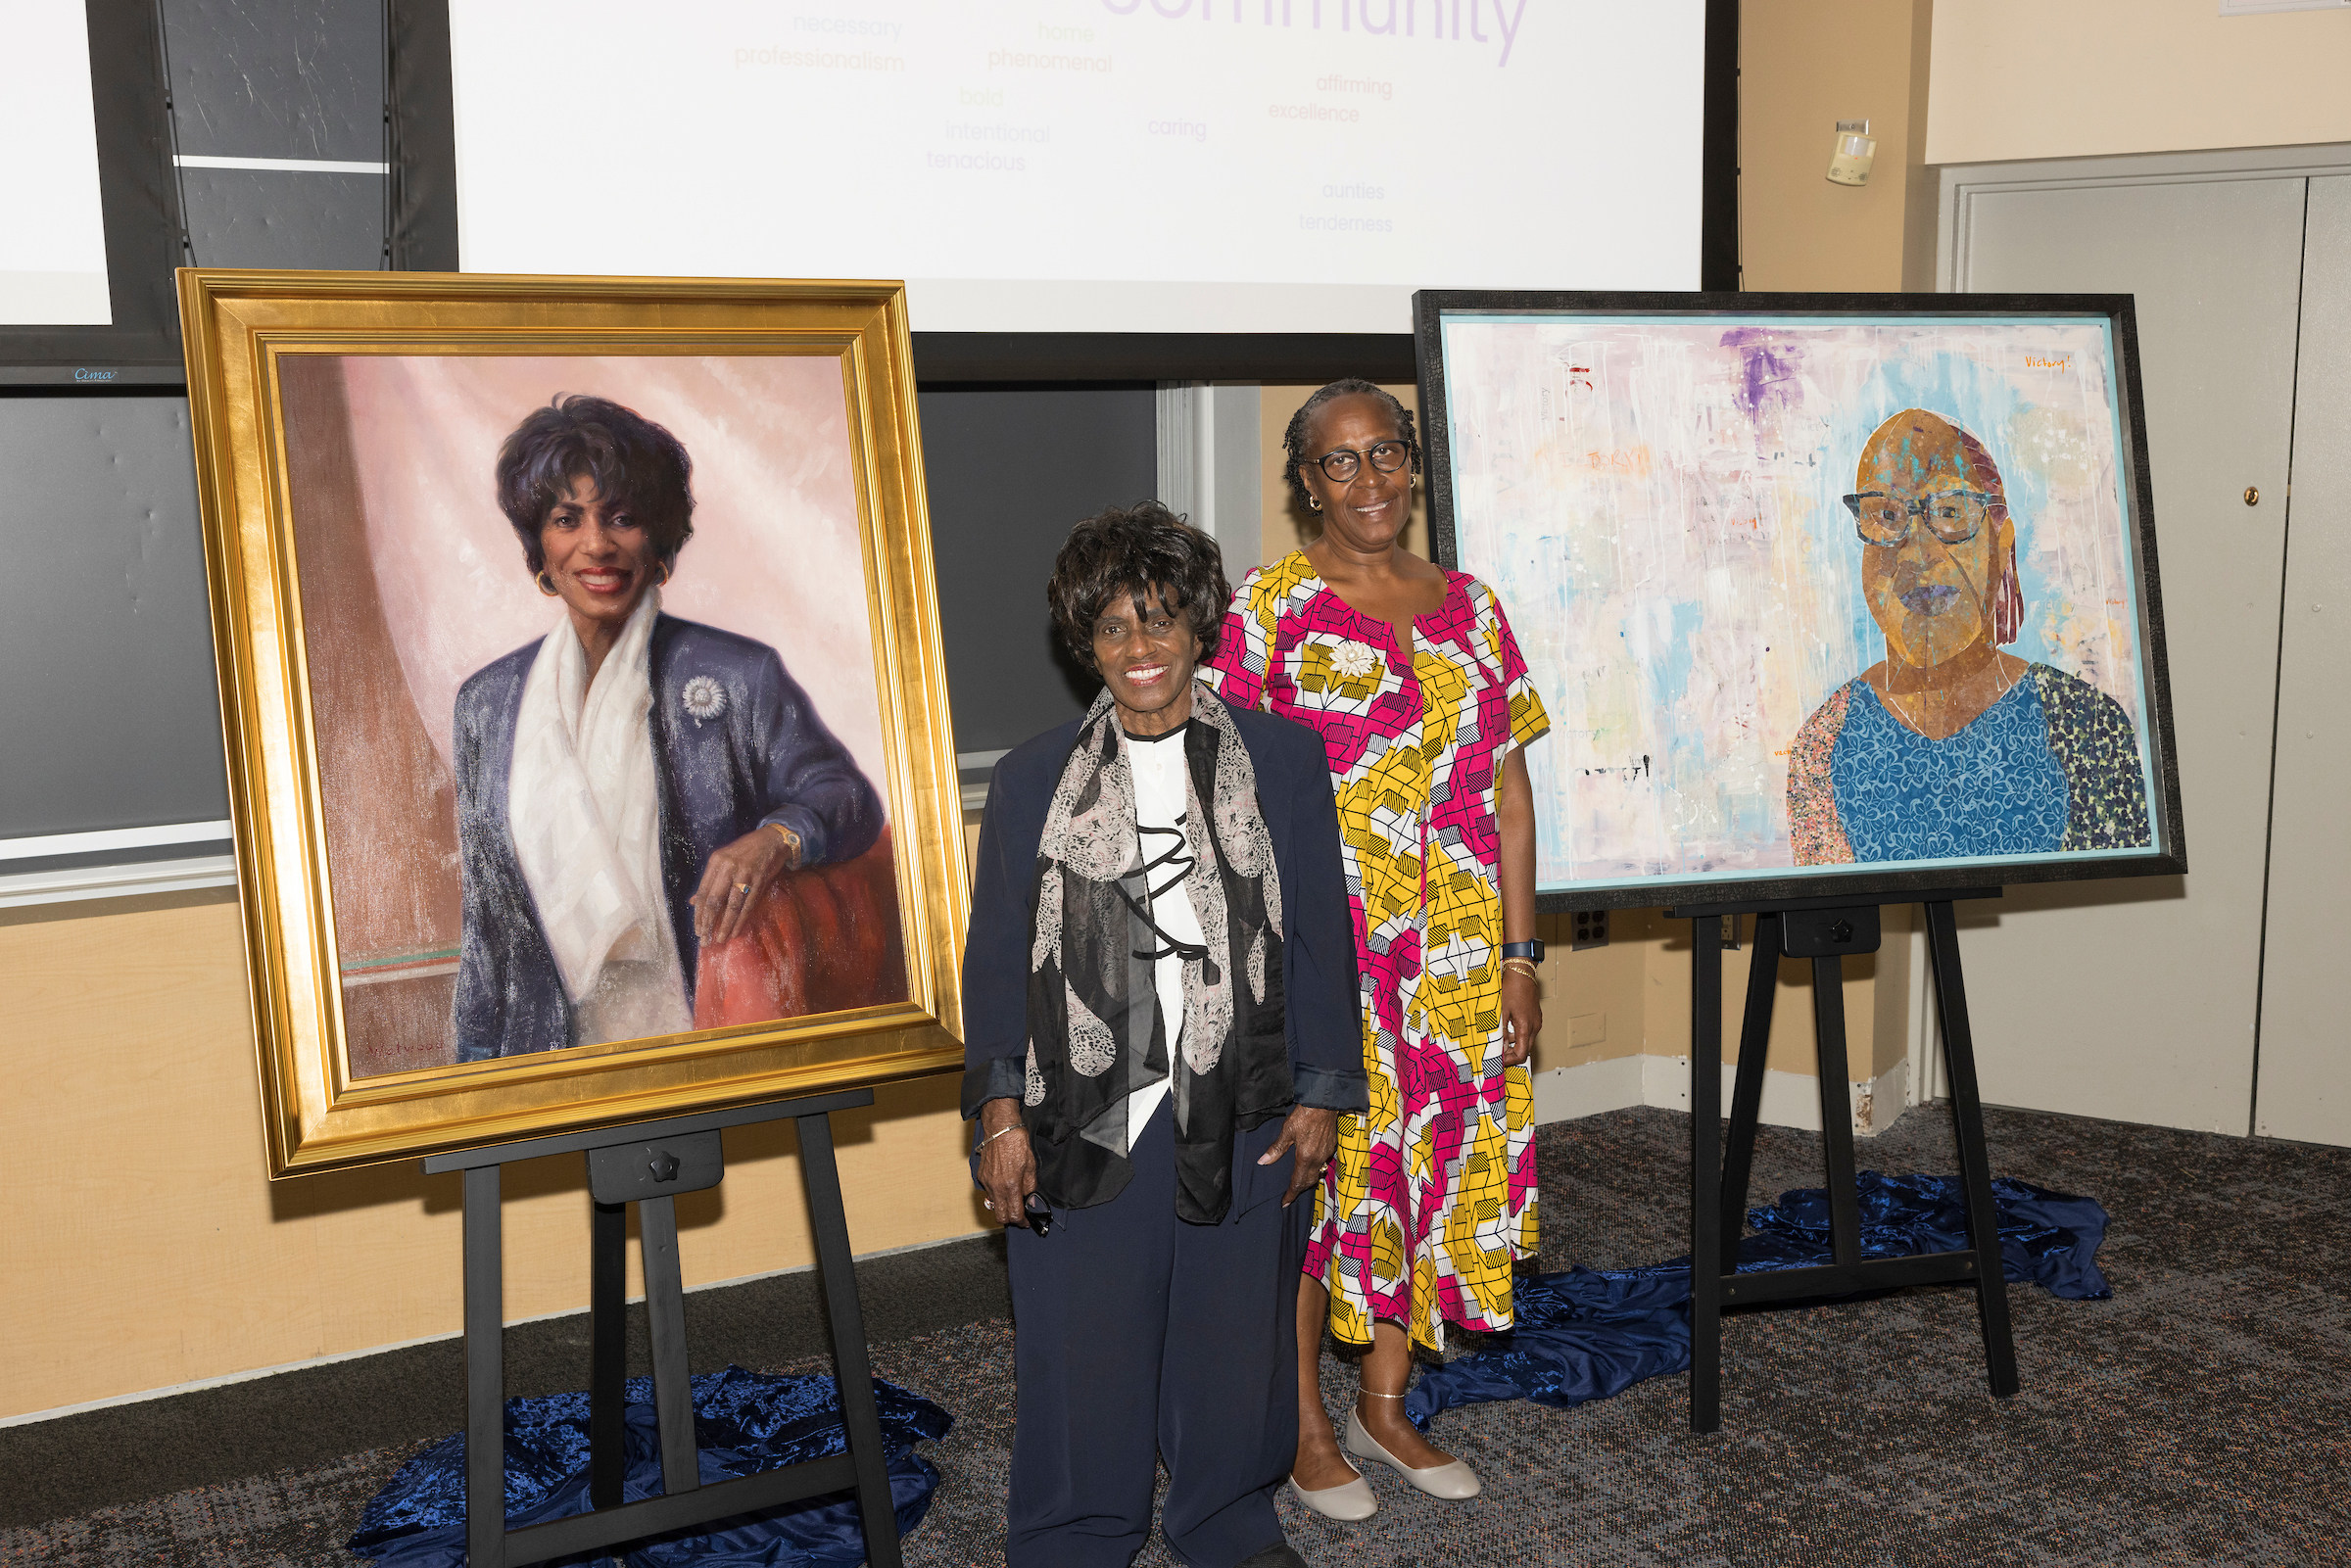 Cora Ingrum and Donna Hamptton pose beside their painted portraits.